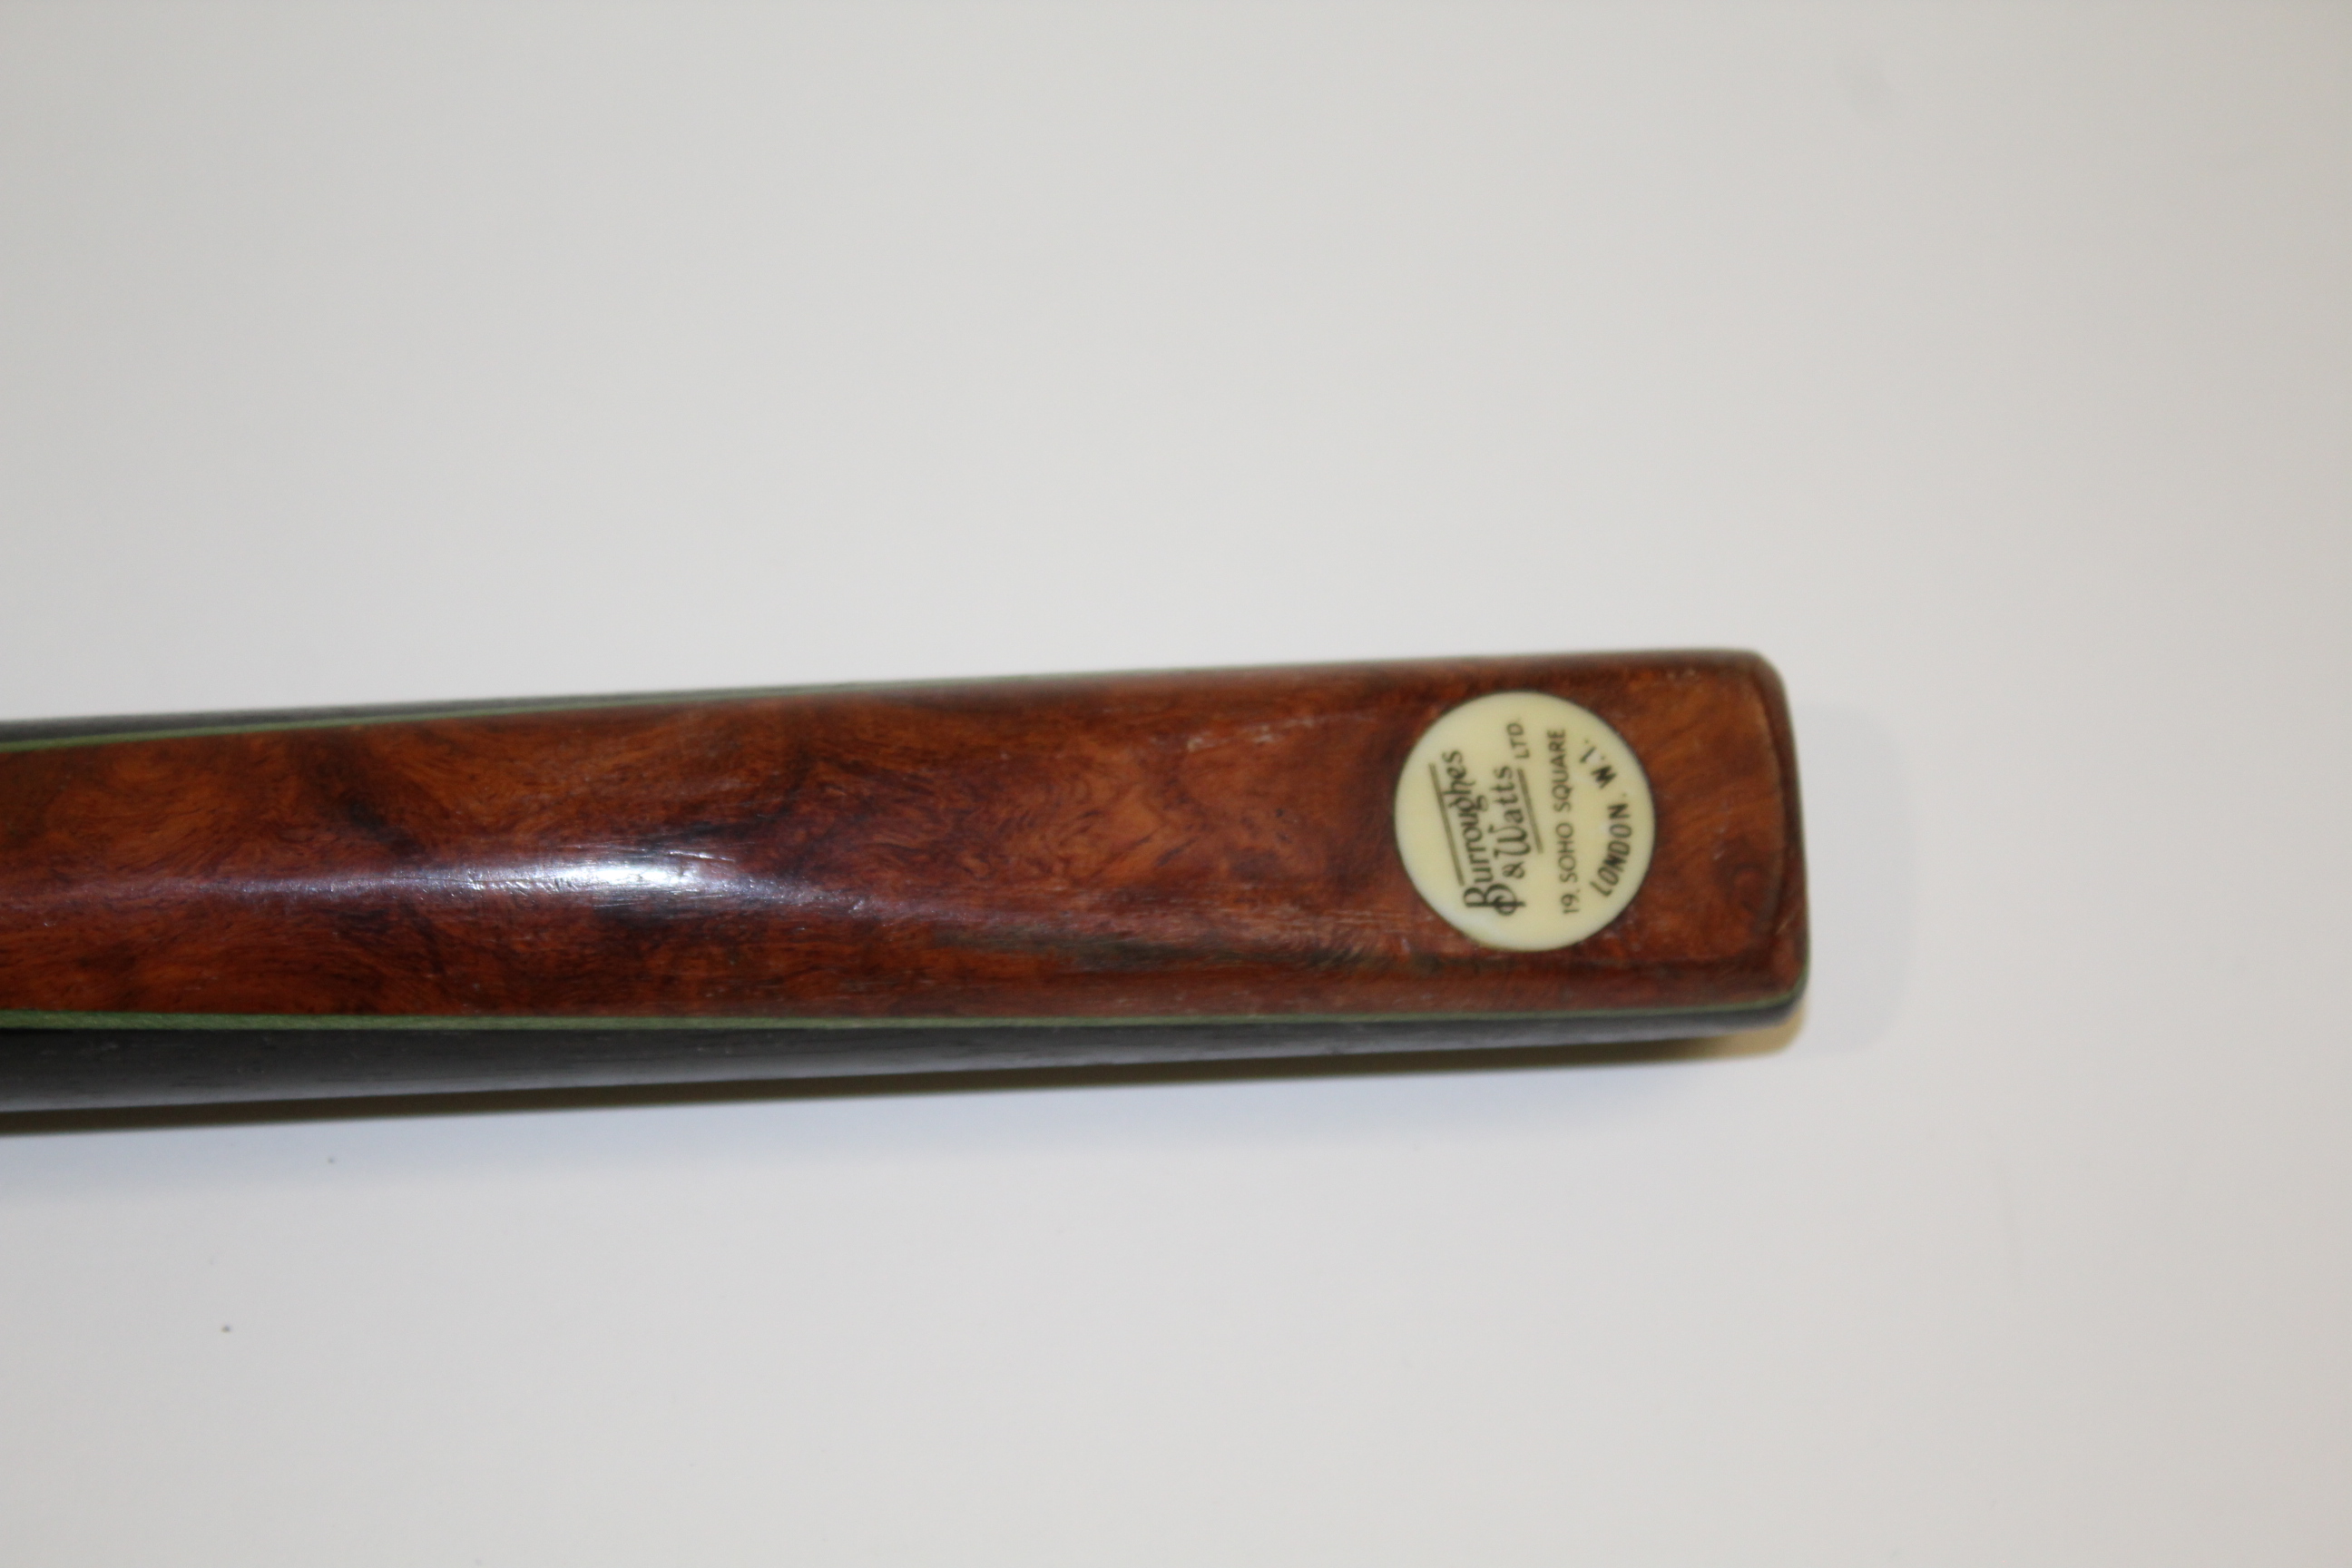 VINTAGE SNOOKER CUE - BURROUGHES & WATTS with a pear wood or maple shaft, with a burr wood, ebony